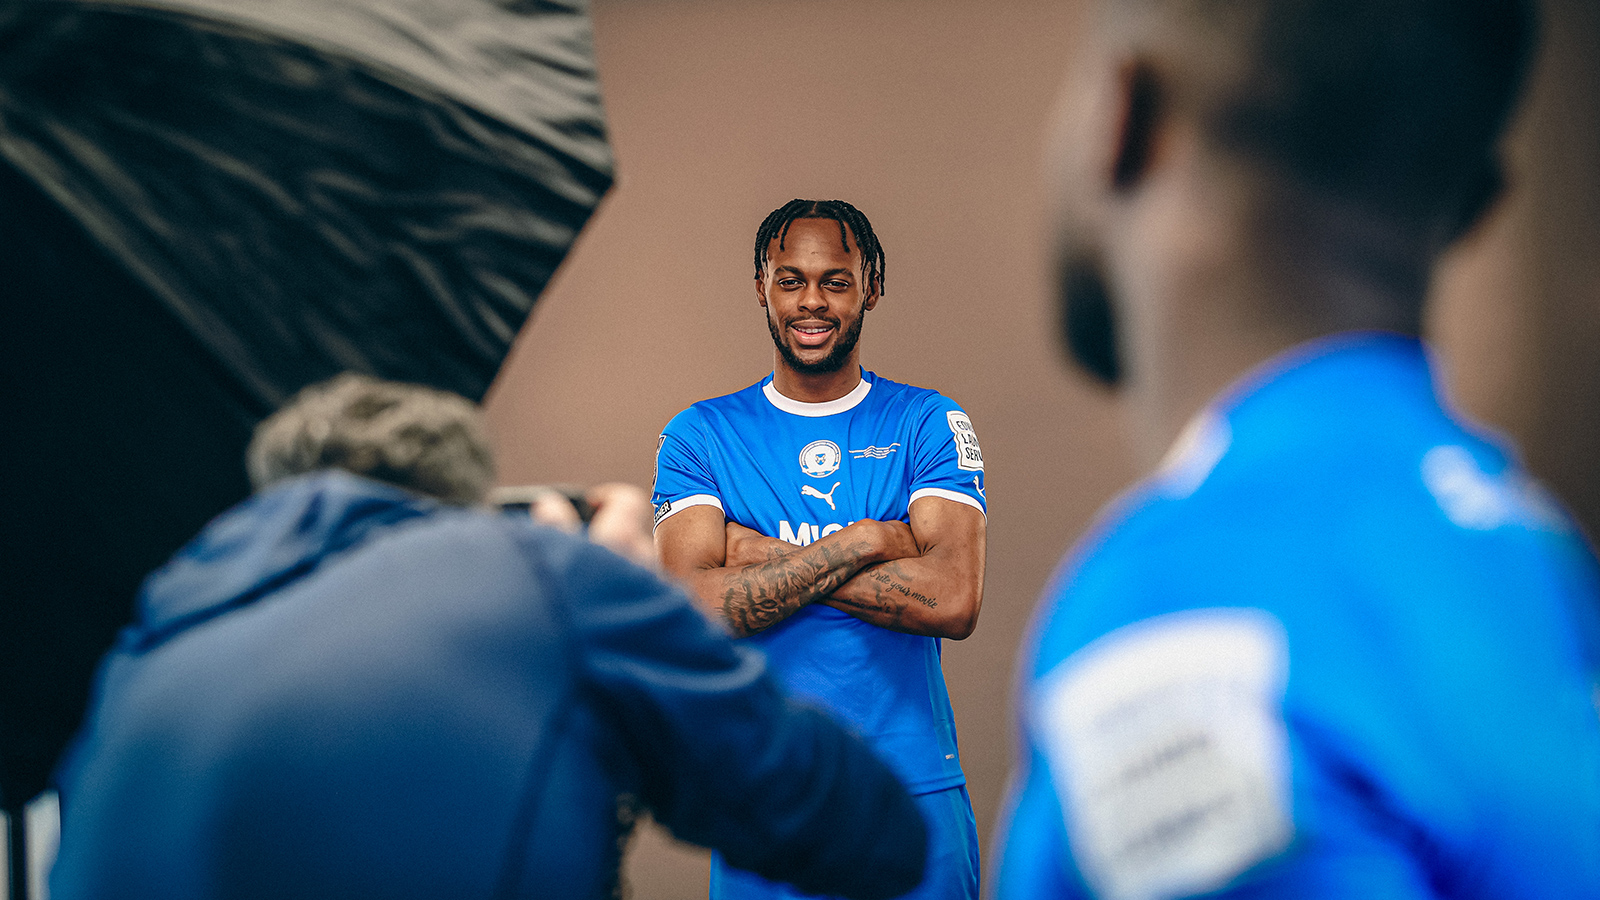 Behind The Scenes Of Pre-Wembley Media Day